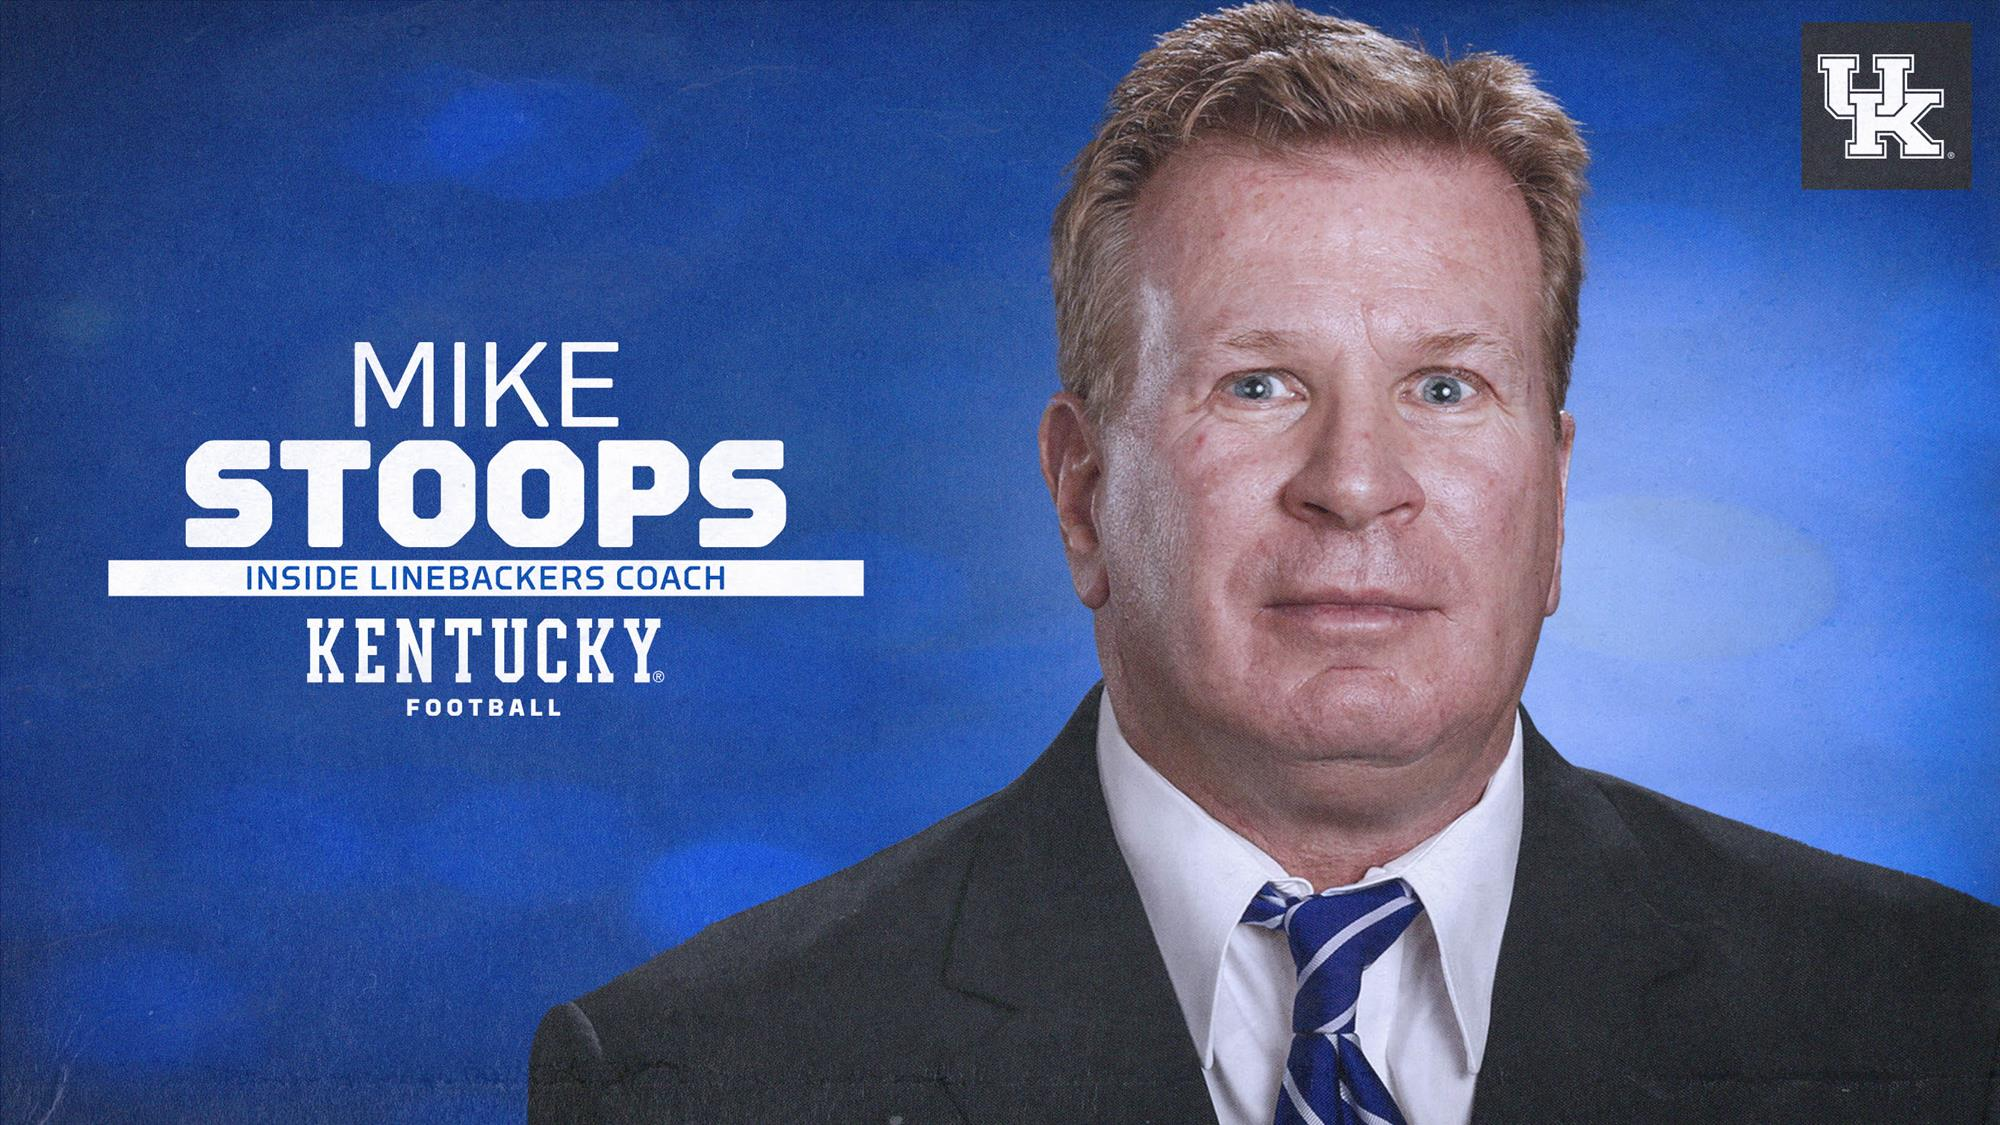 Mike Stoops Named Inside Linebackers Coach